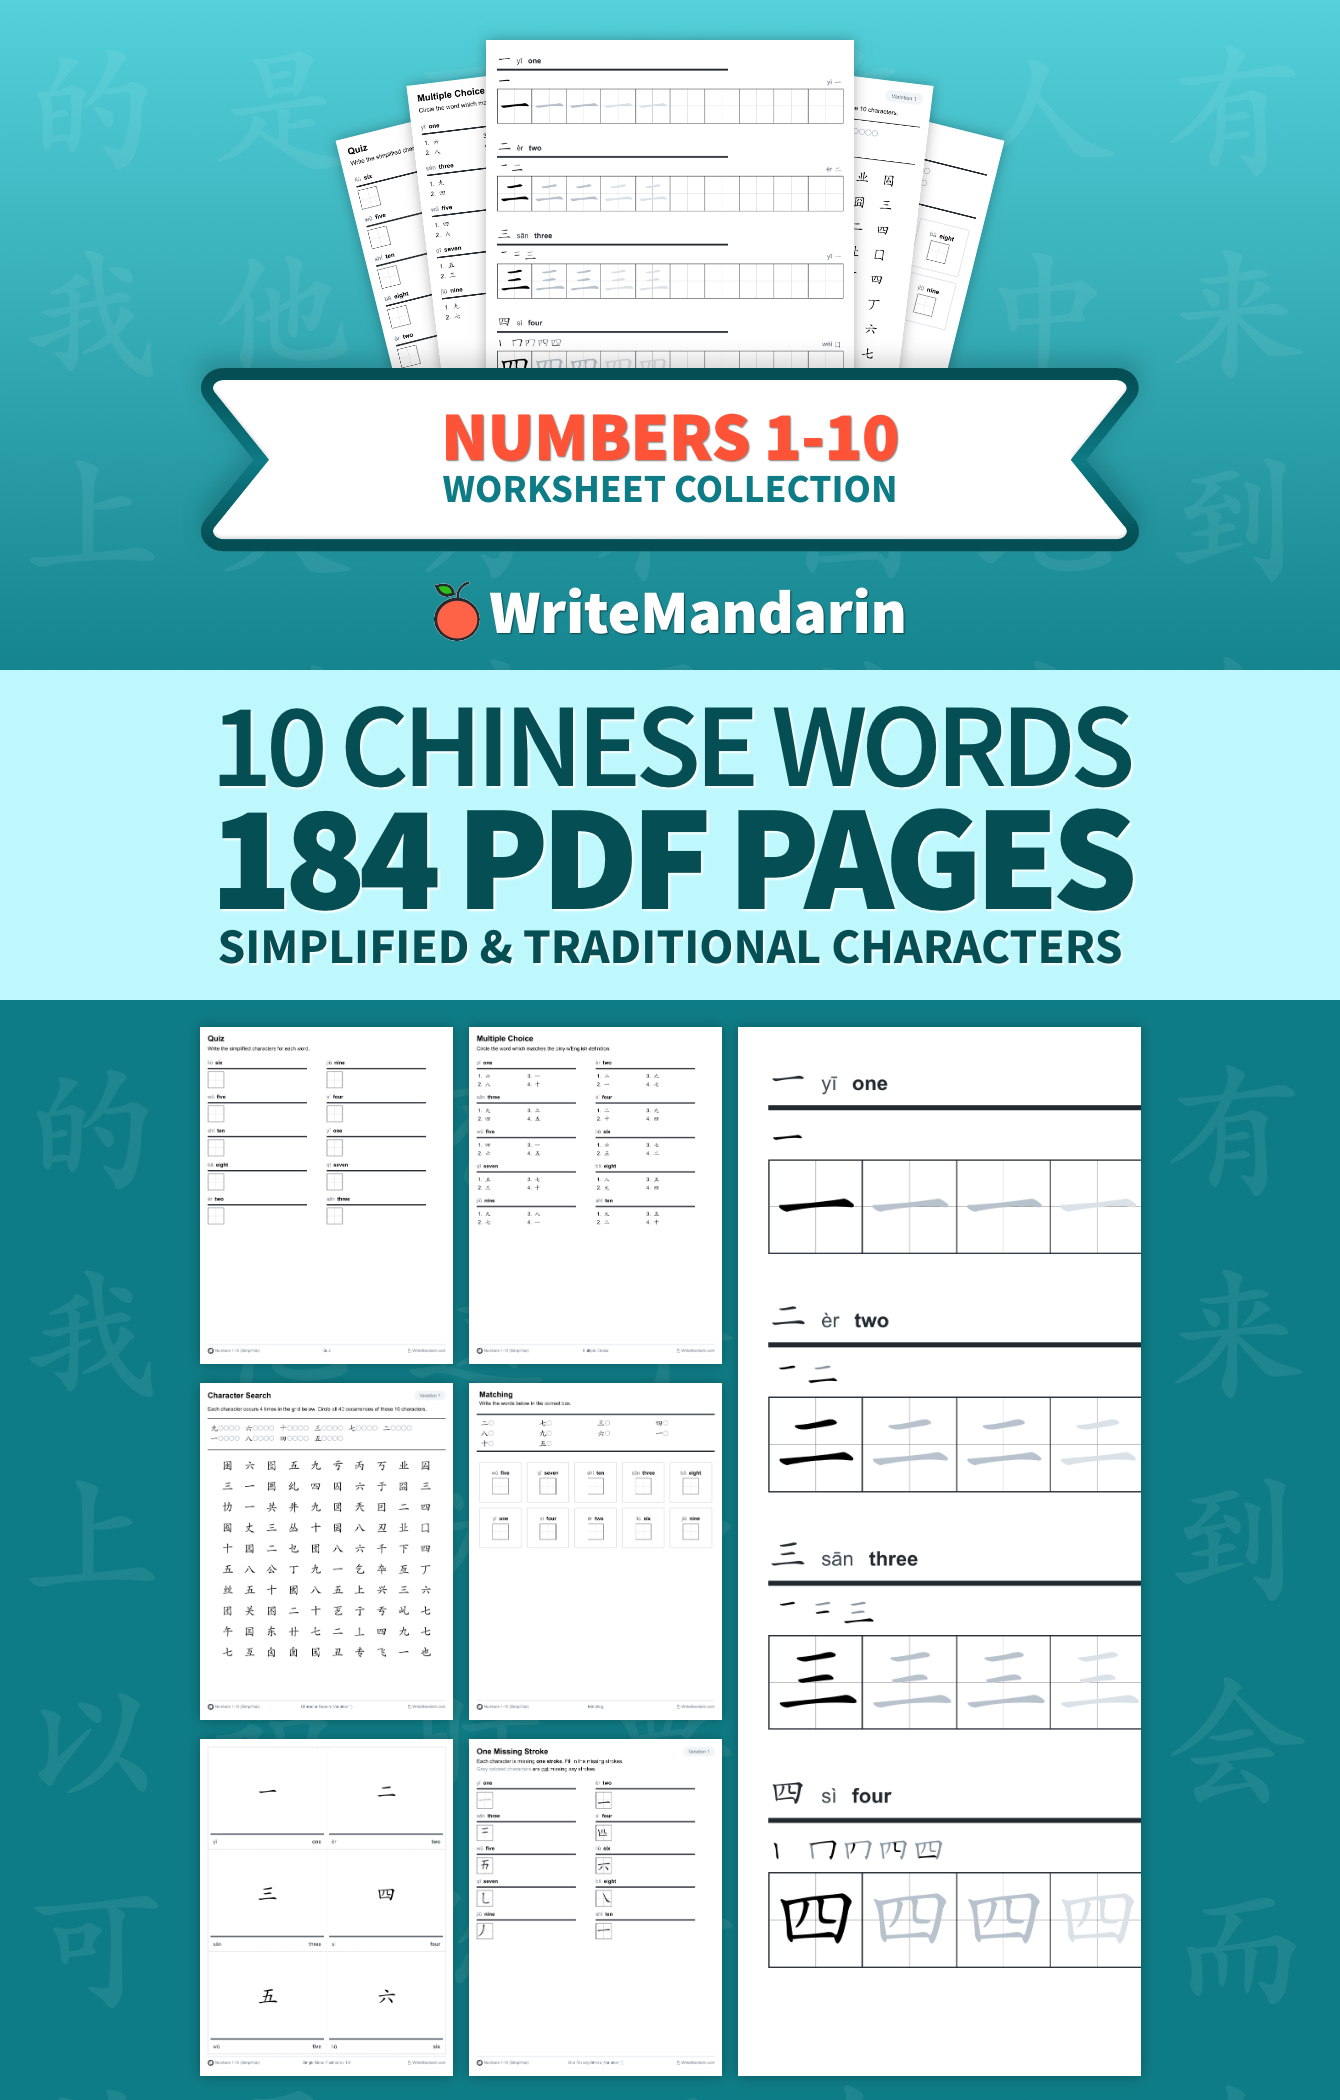 Preview image of Numbers 1-10 worksheet collection